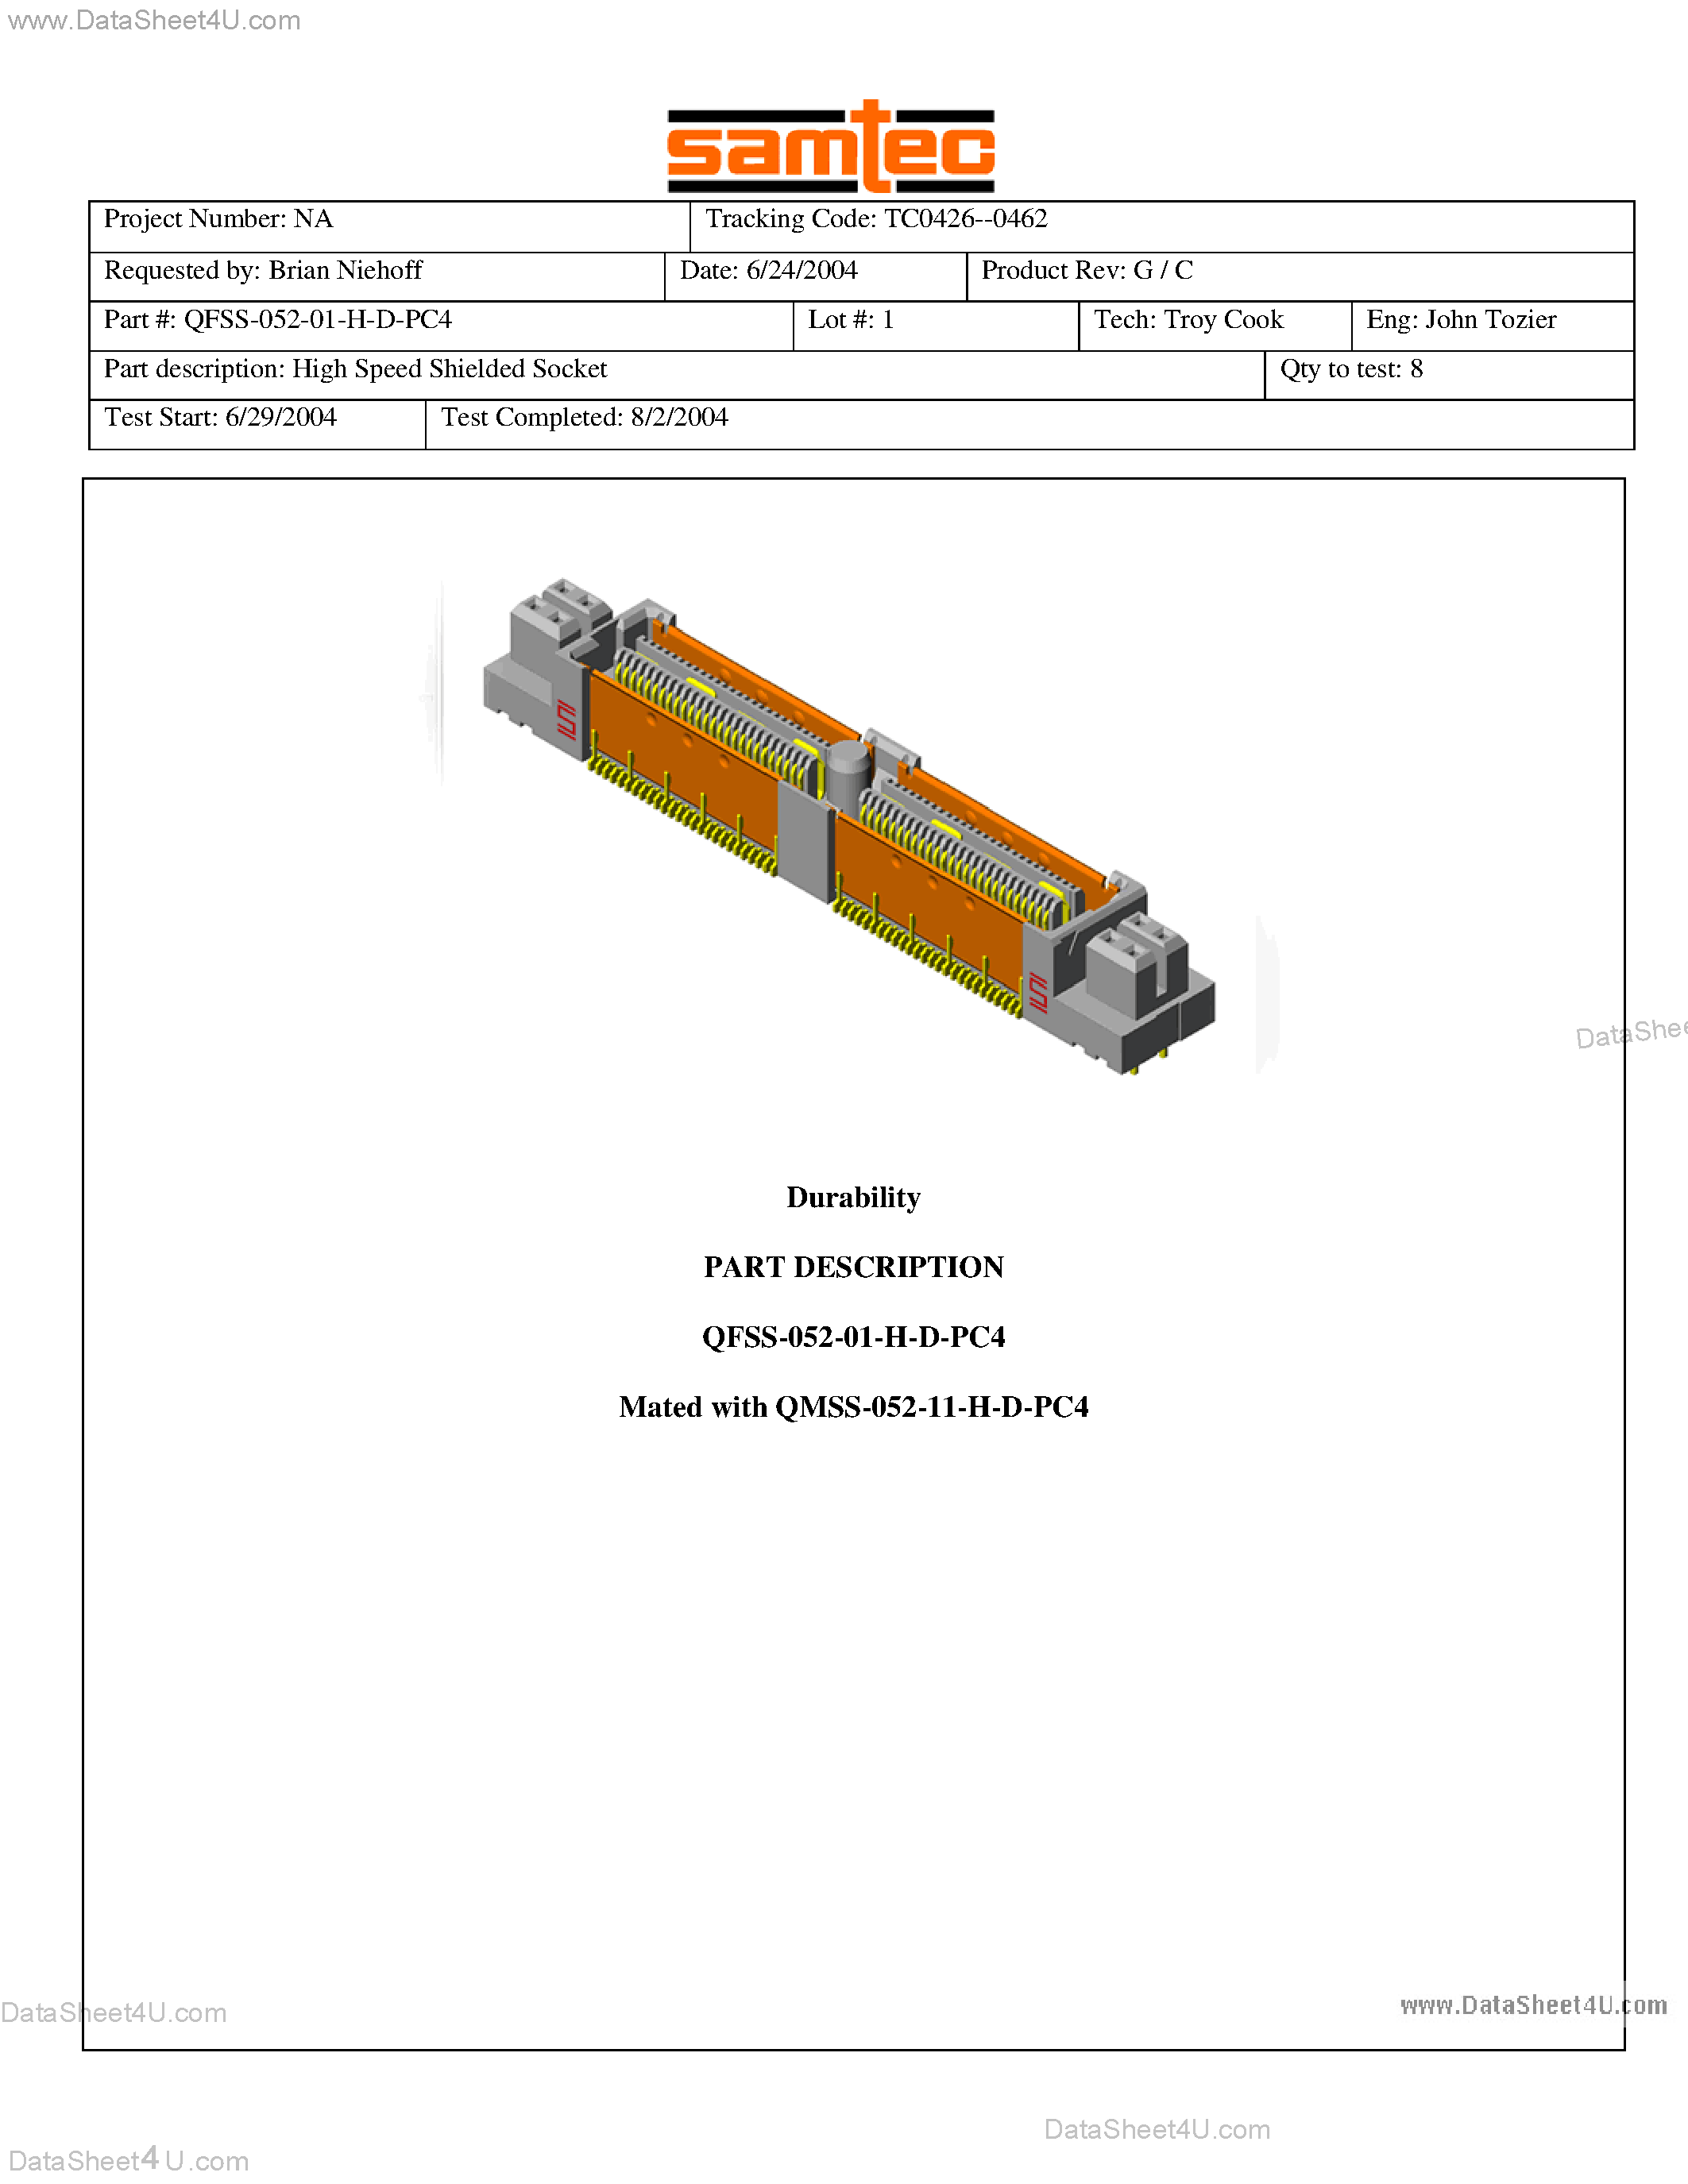 Datasheet QFSS-052-01-H-D-A-PC4 - High Speed Shielded Socket page 1